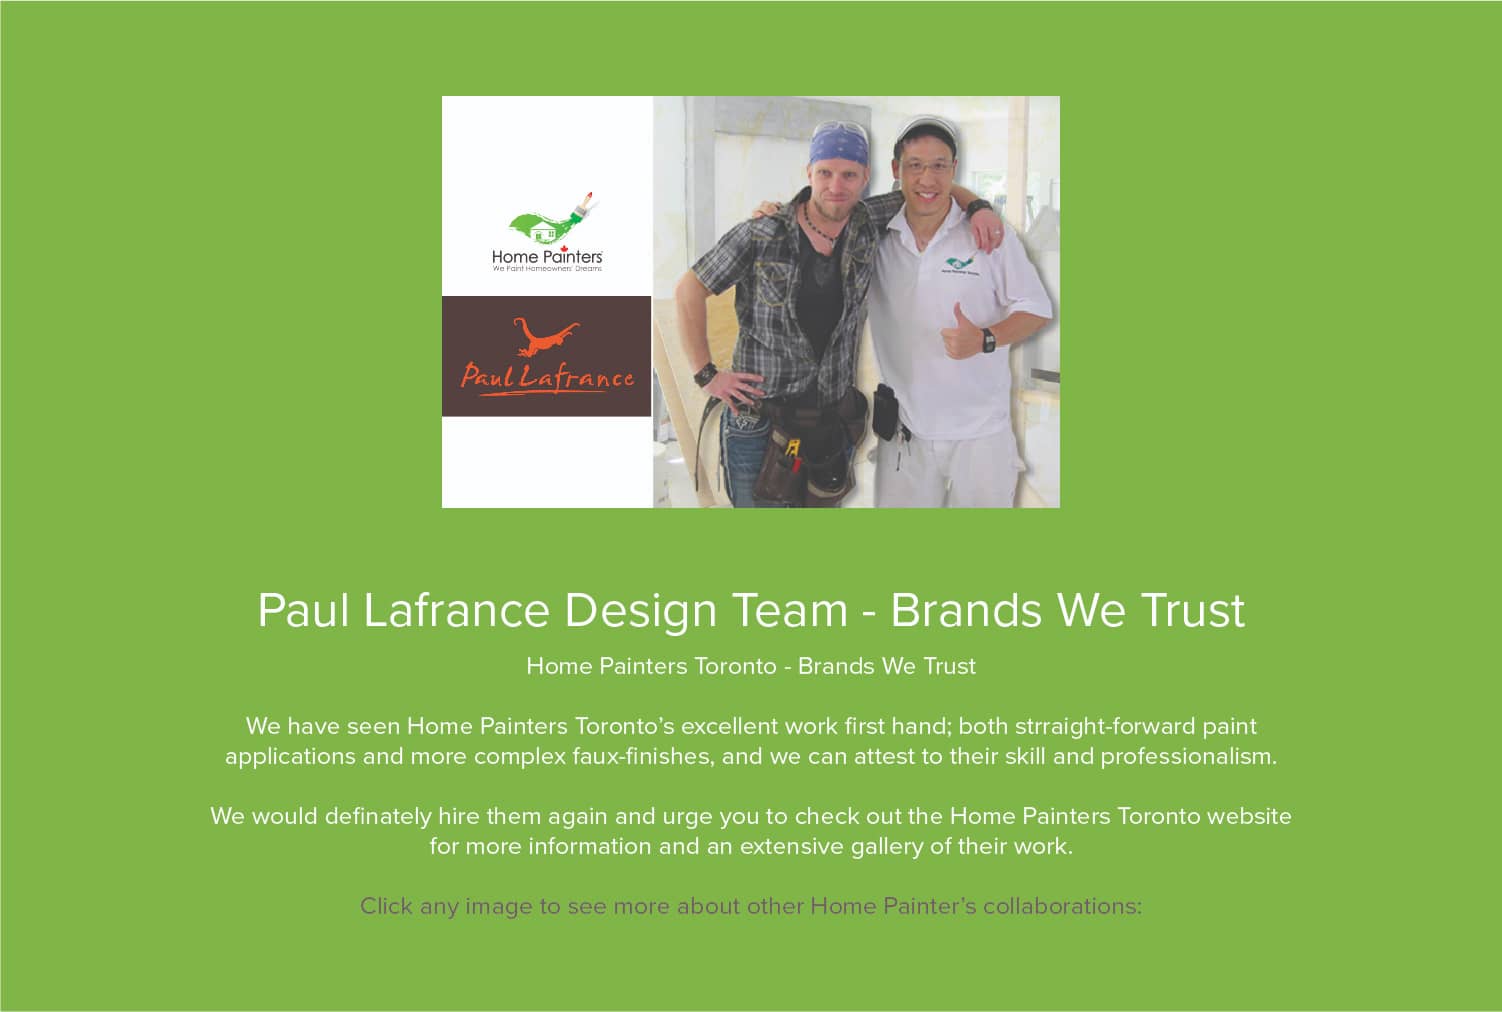 Home painter's collaboration with Paul Lafrance design team for more complex faux finishes